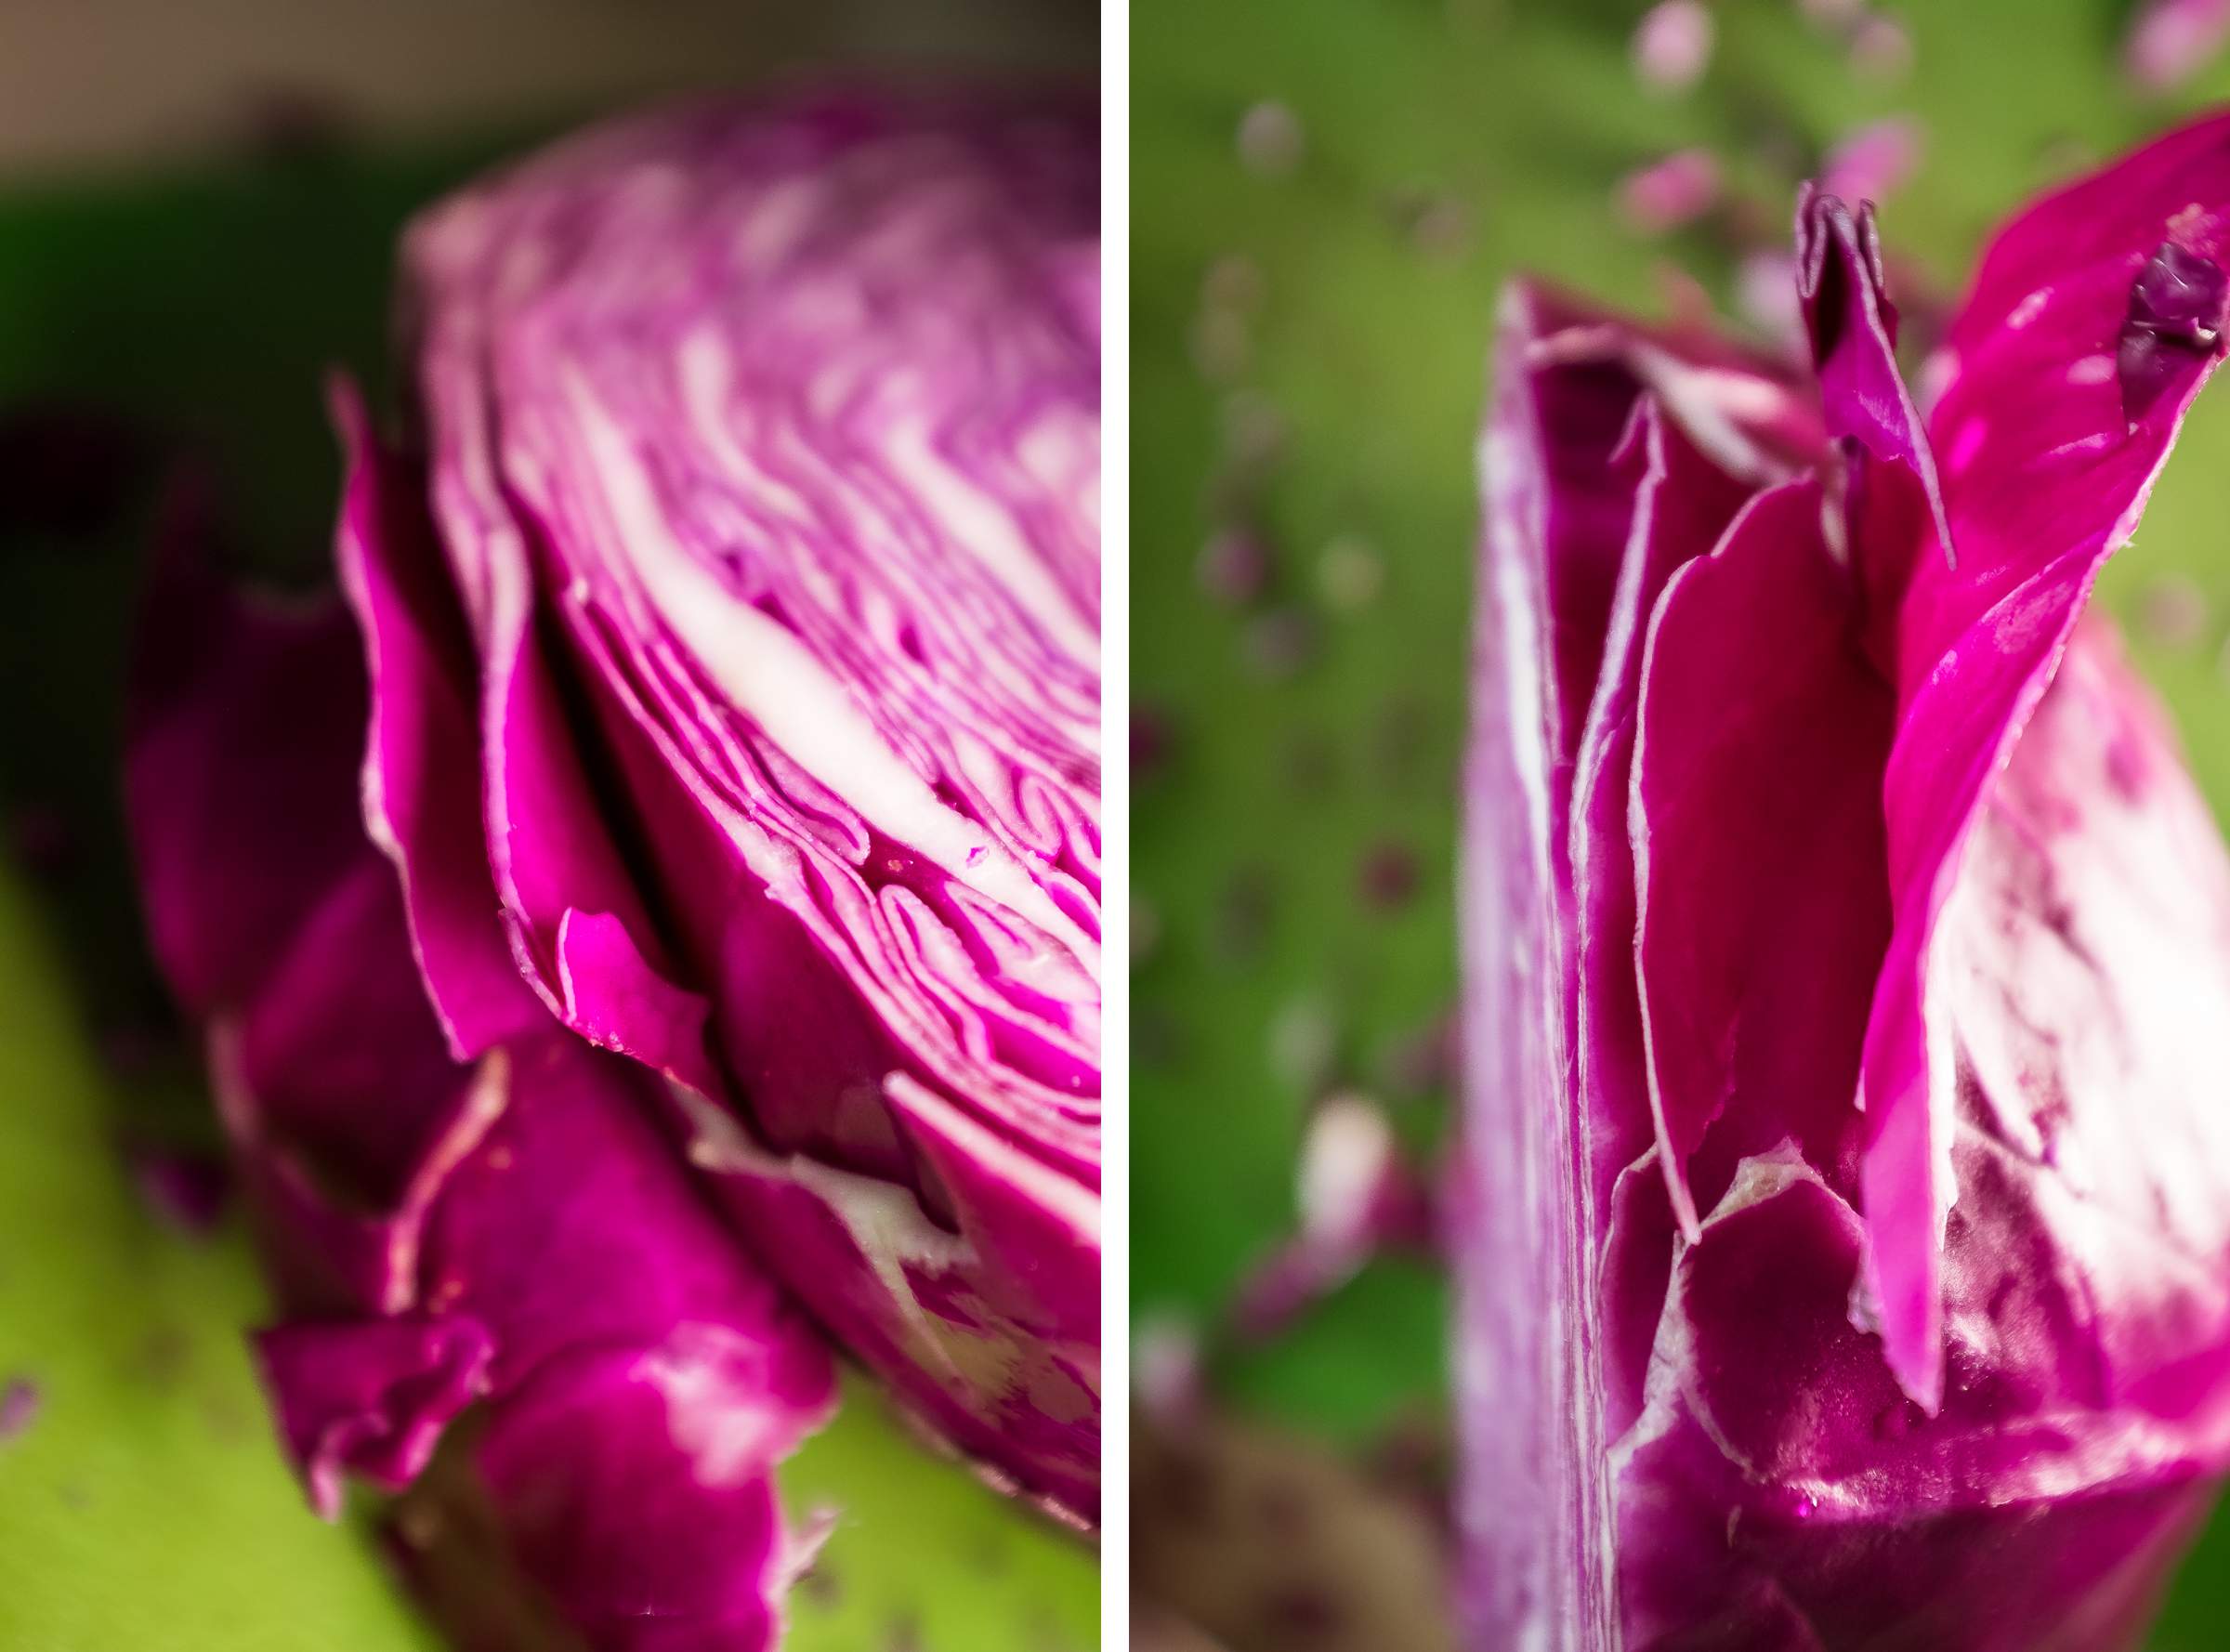 How to clean and cut red cabbage recipe with apples orange goat cheese